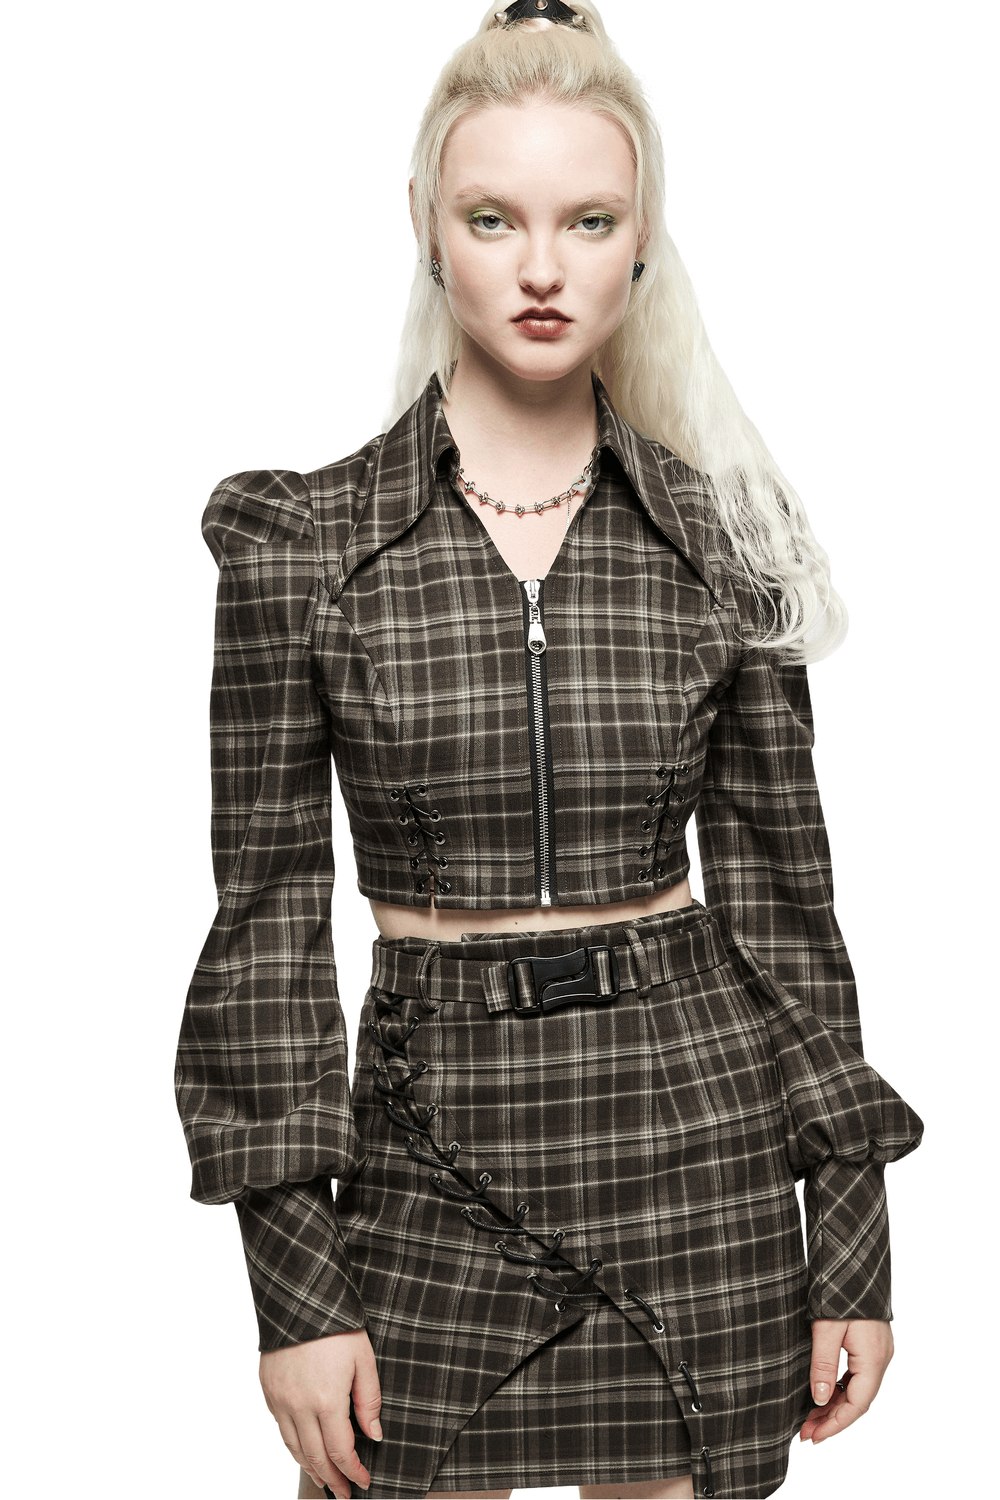 Edgy Plaid Zip Crop Top with Long Bubble Sleeves